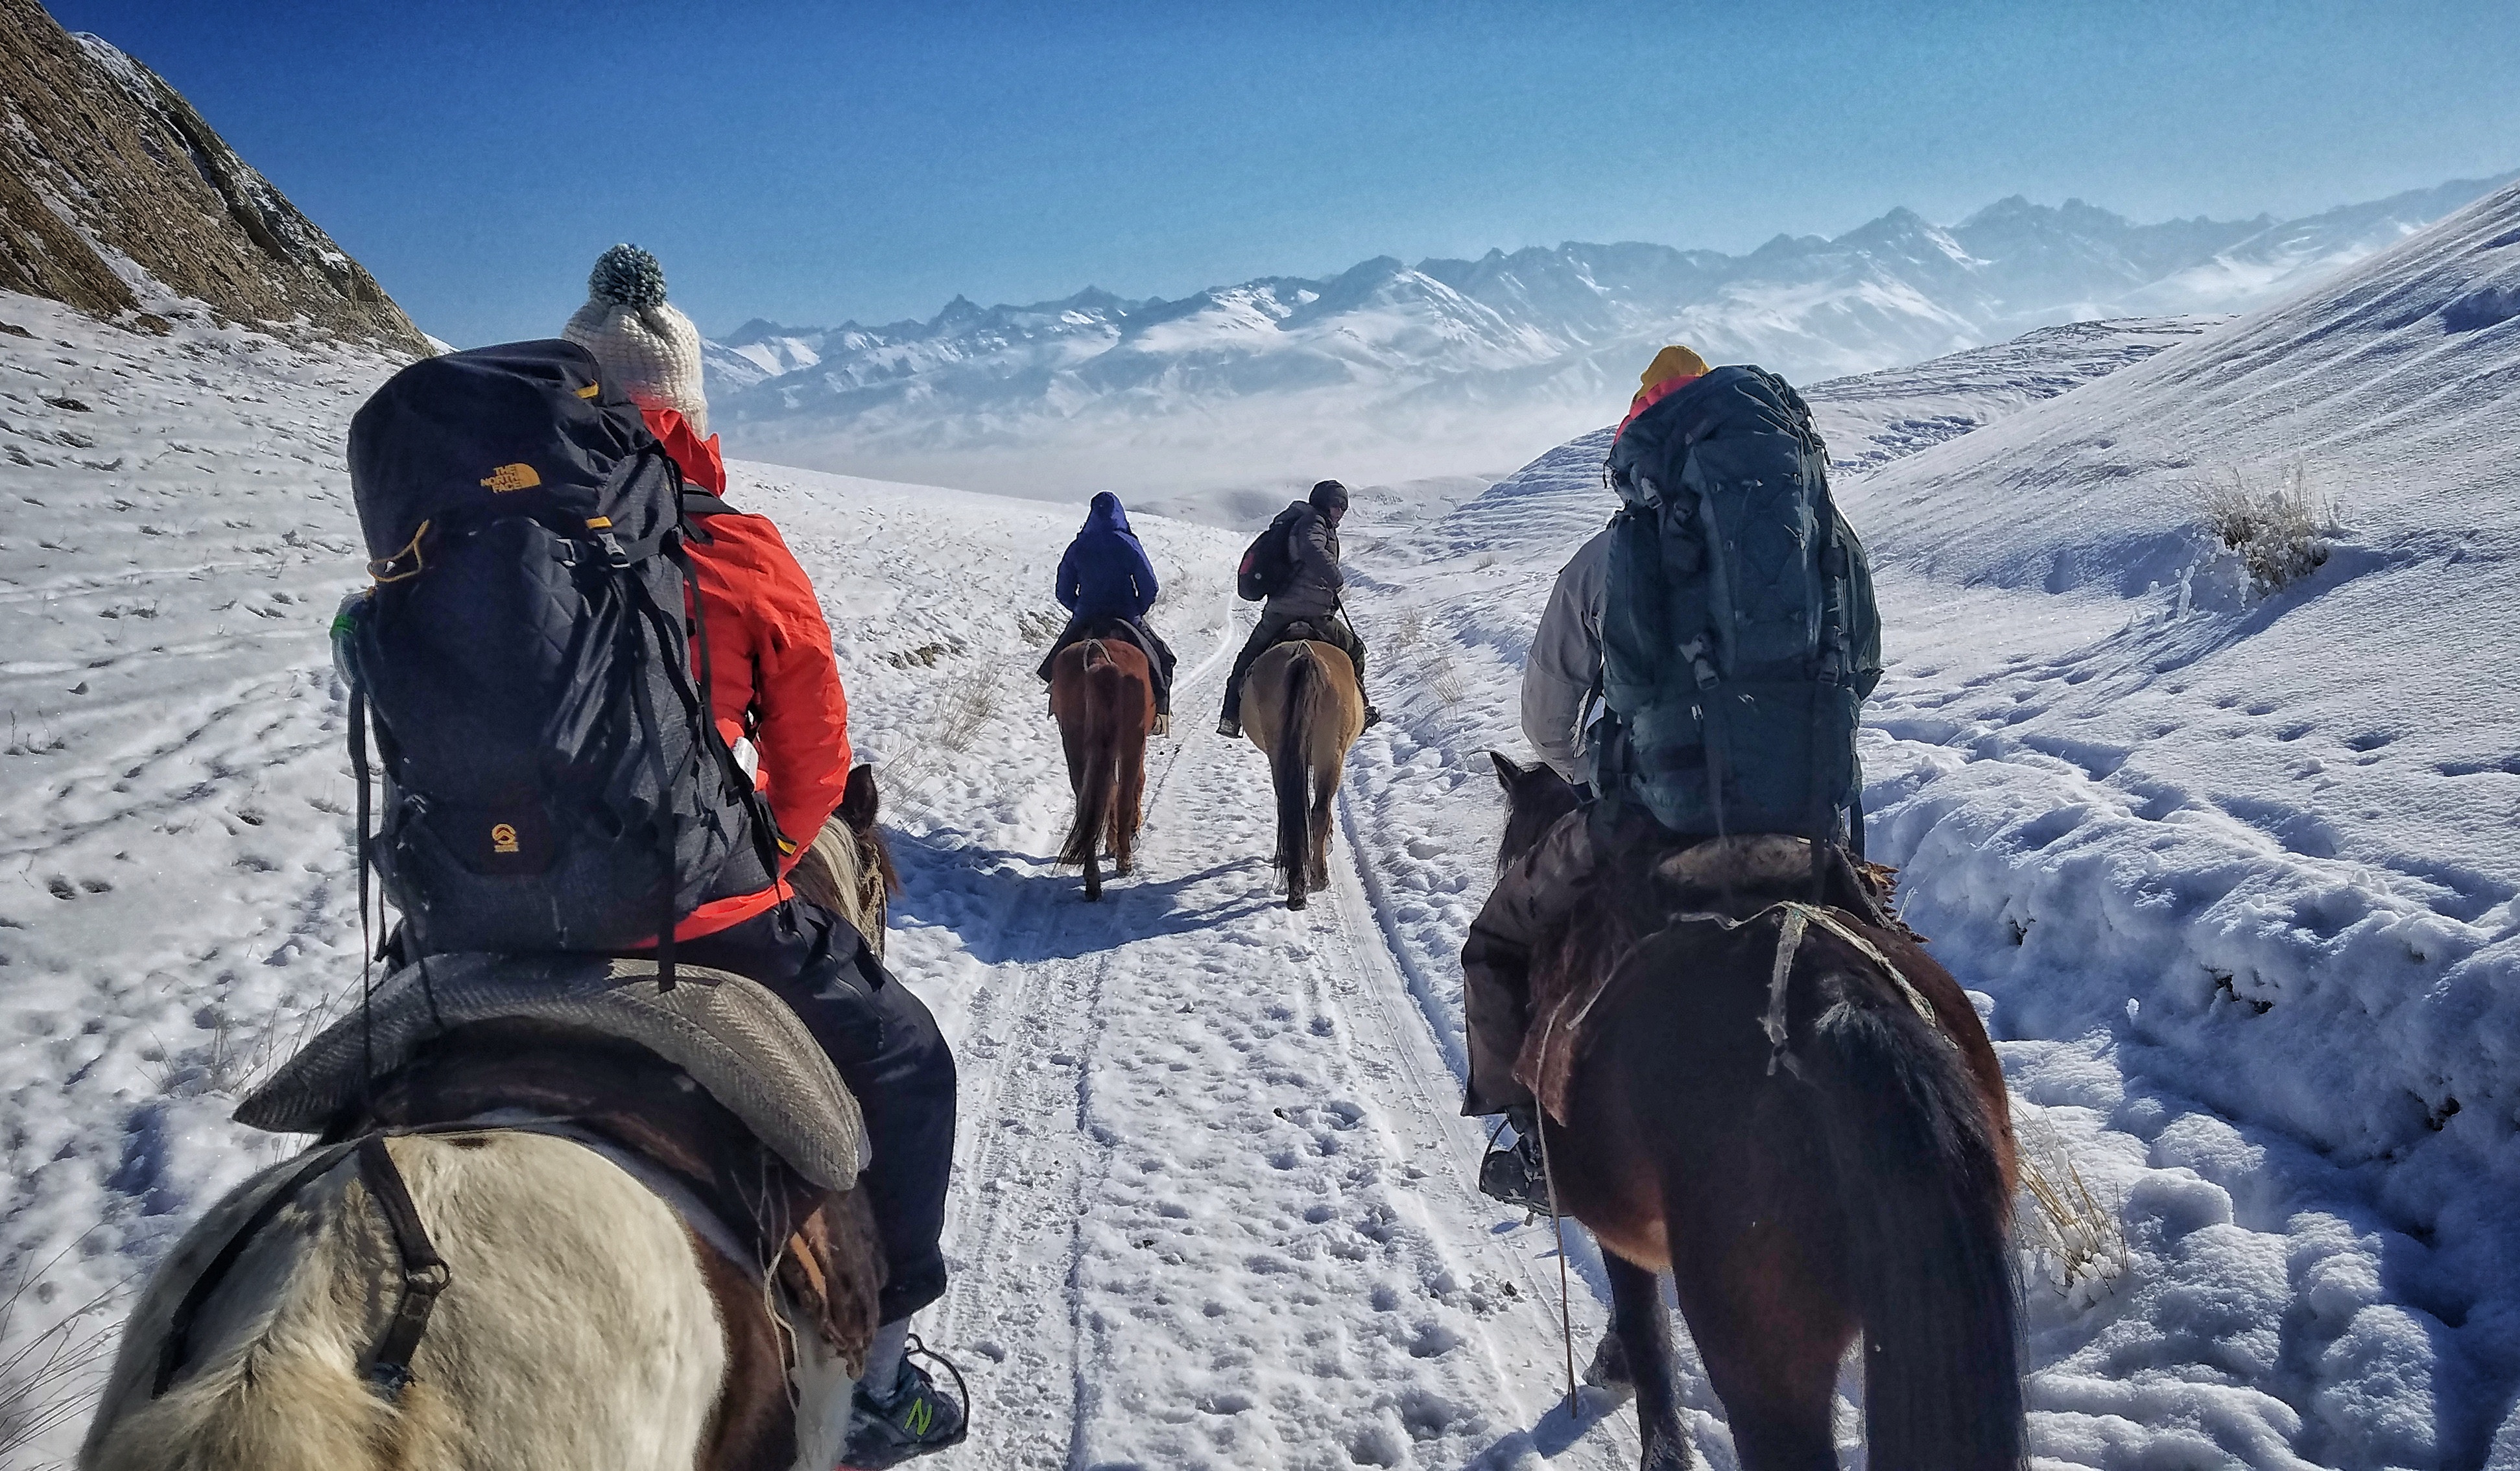 Expedition Lessons Learned From the Mountains of Kyrgyzstan